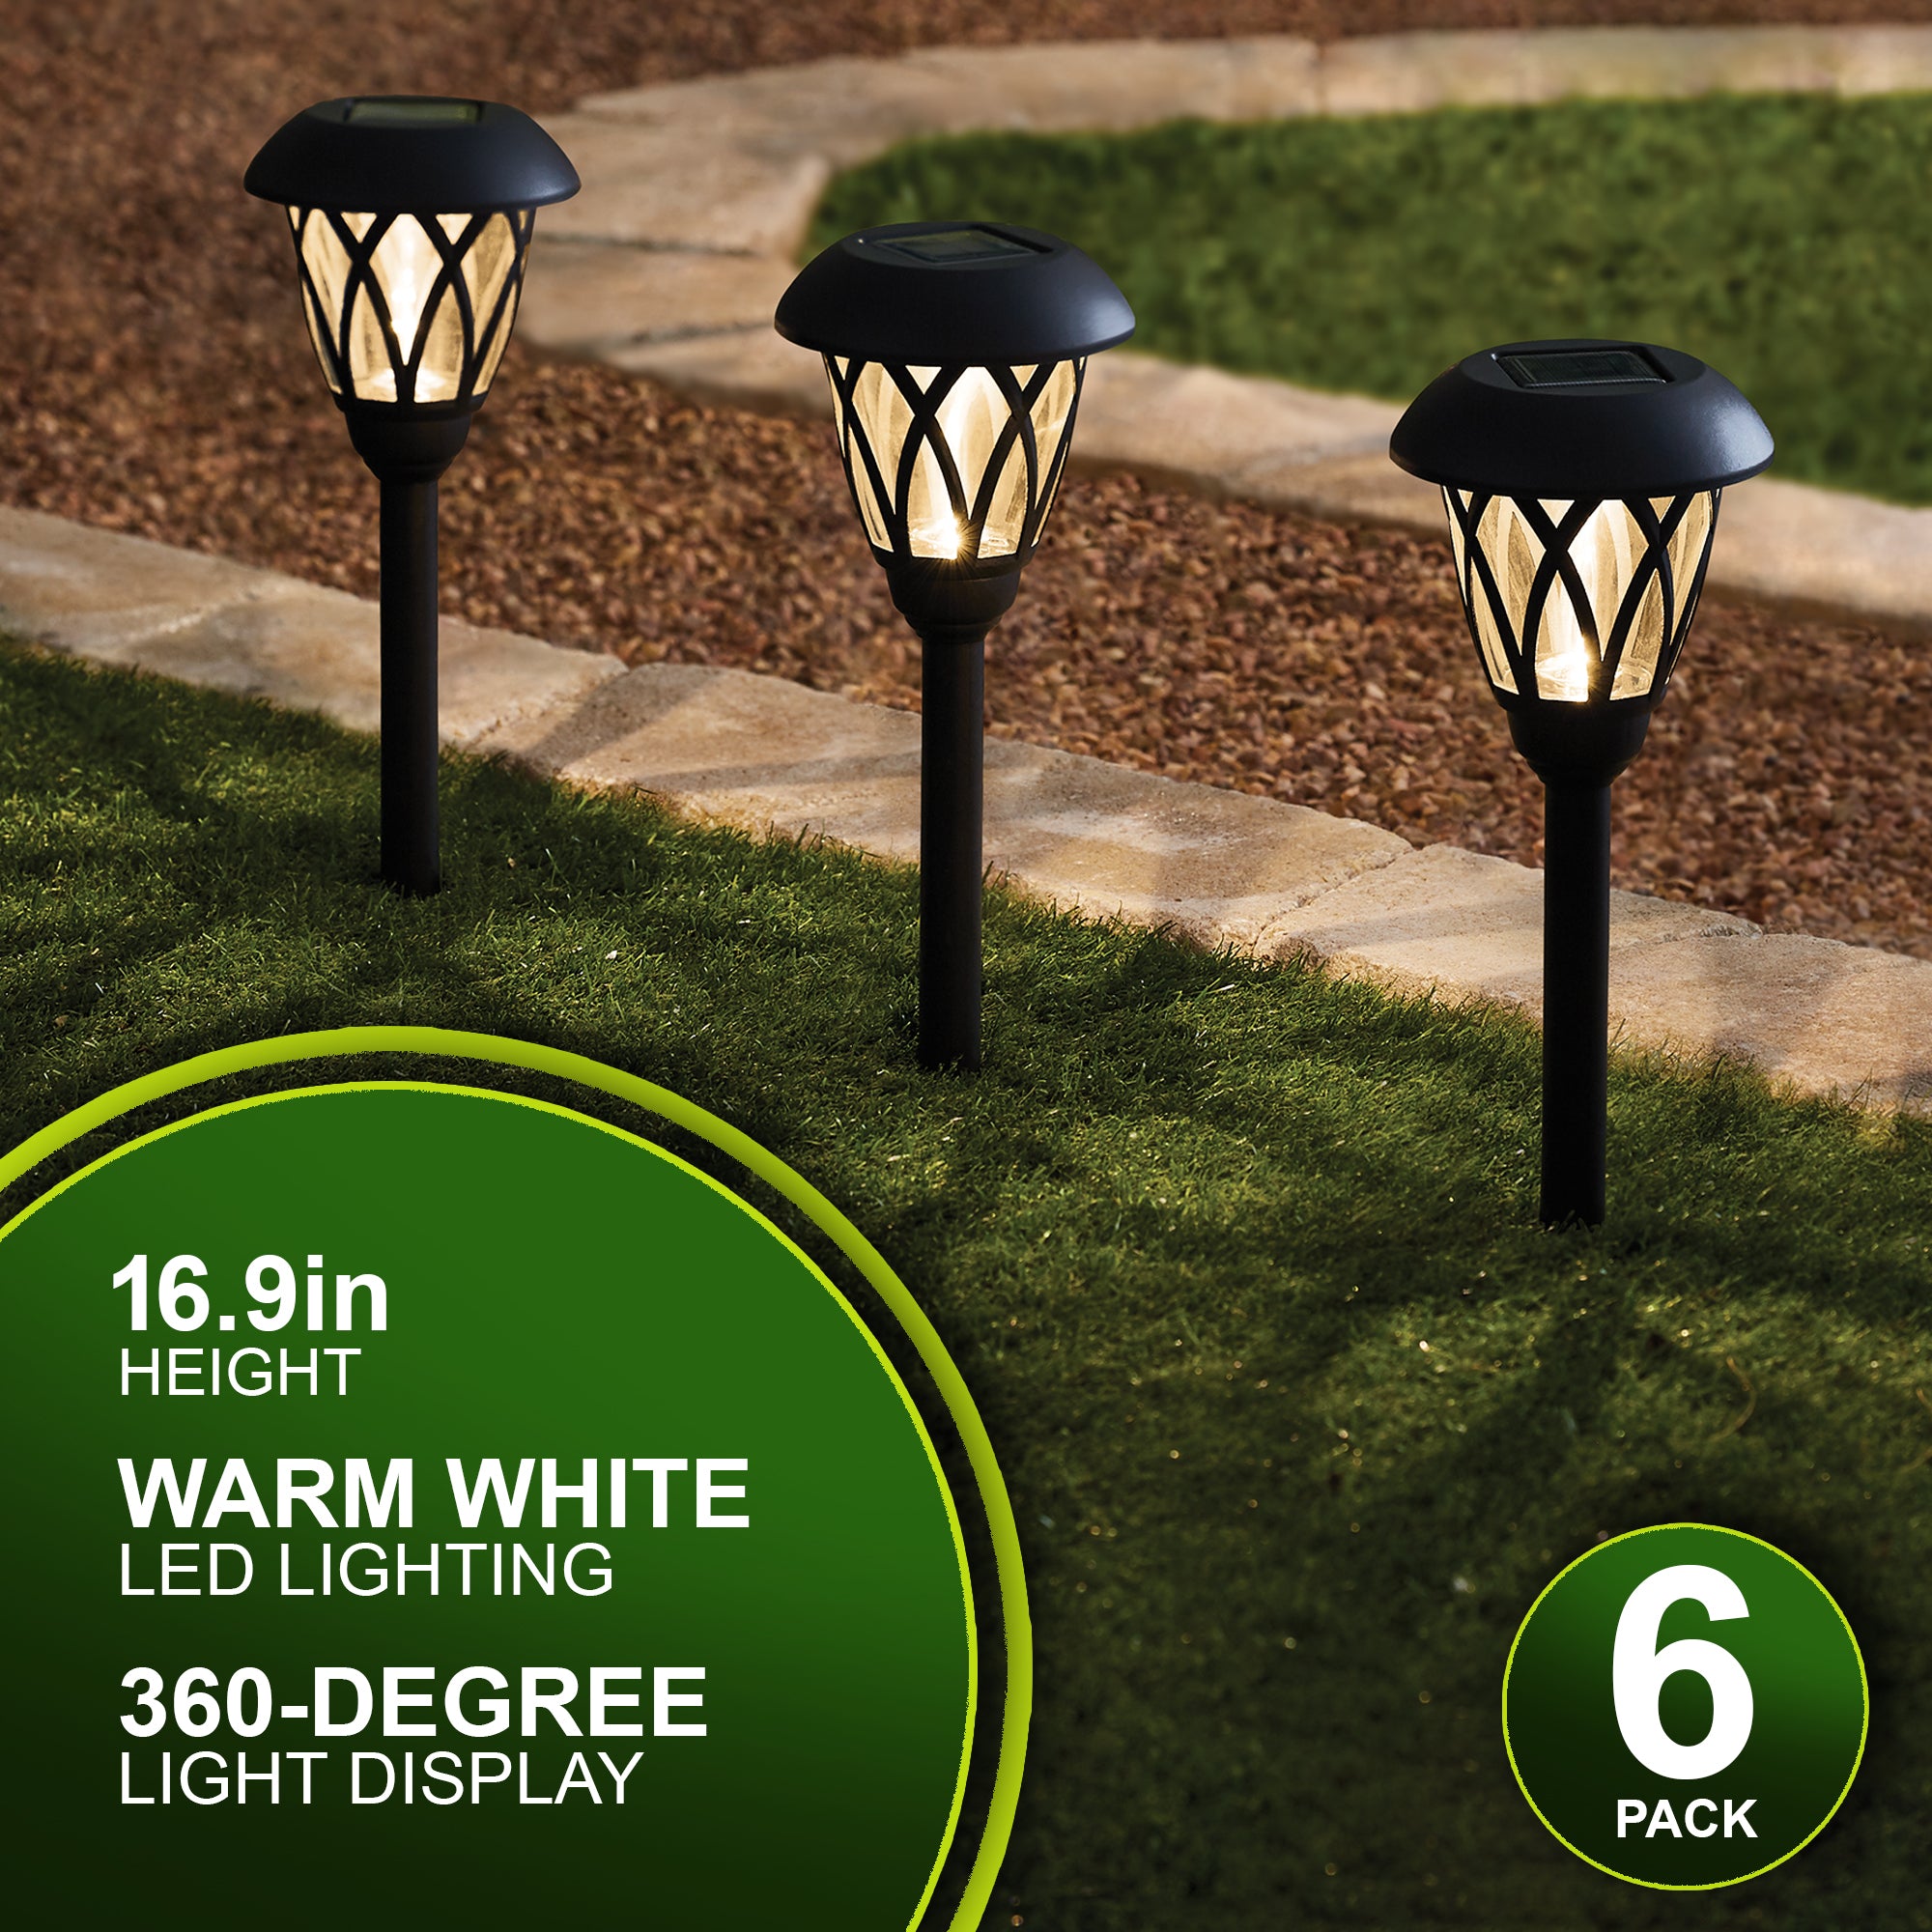 Mainstays Solar LED Landscape Pathway Light with Glass Lens, 6 Count (8 Lumens)